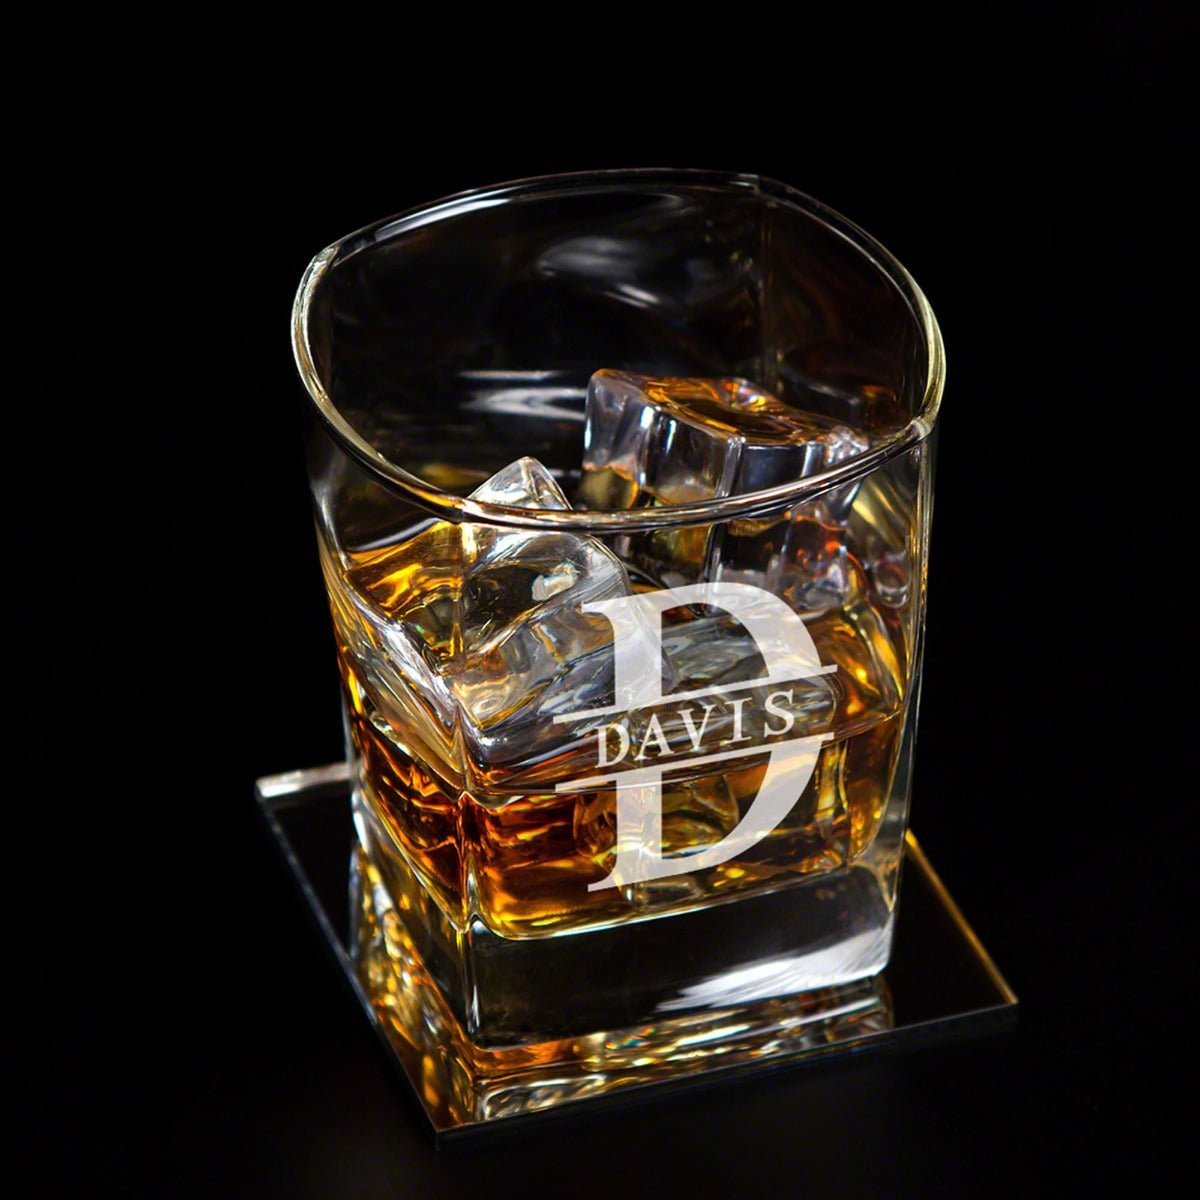 Custom Rutherford Gifts for Bourbon Lovers - Carson Decanter and Glasses in Ebony Black Box